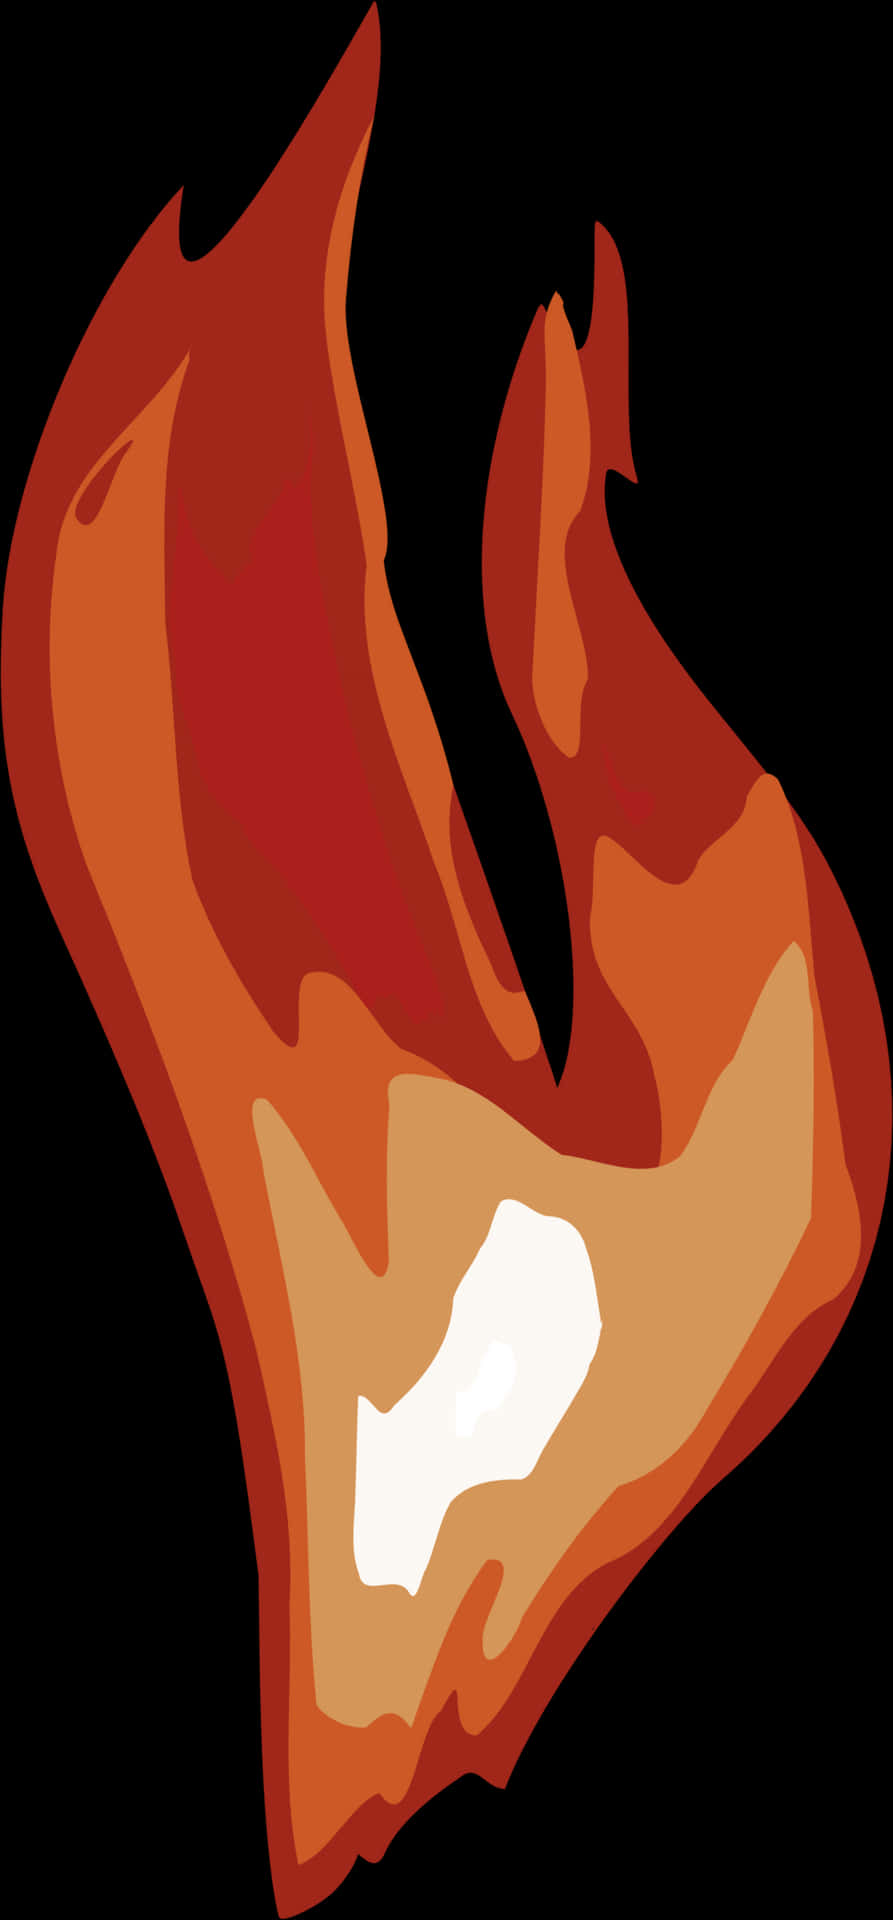 Stylized Flame Illustration PNG